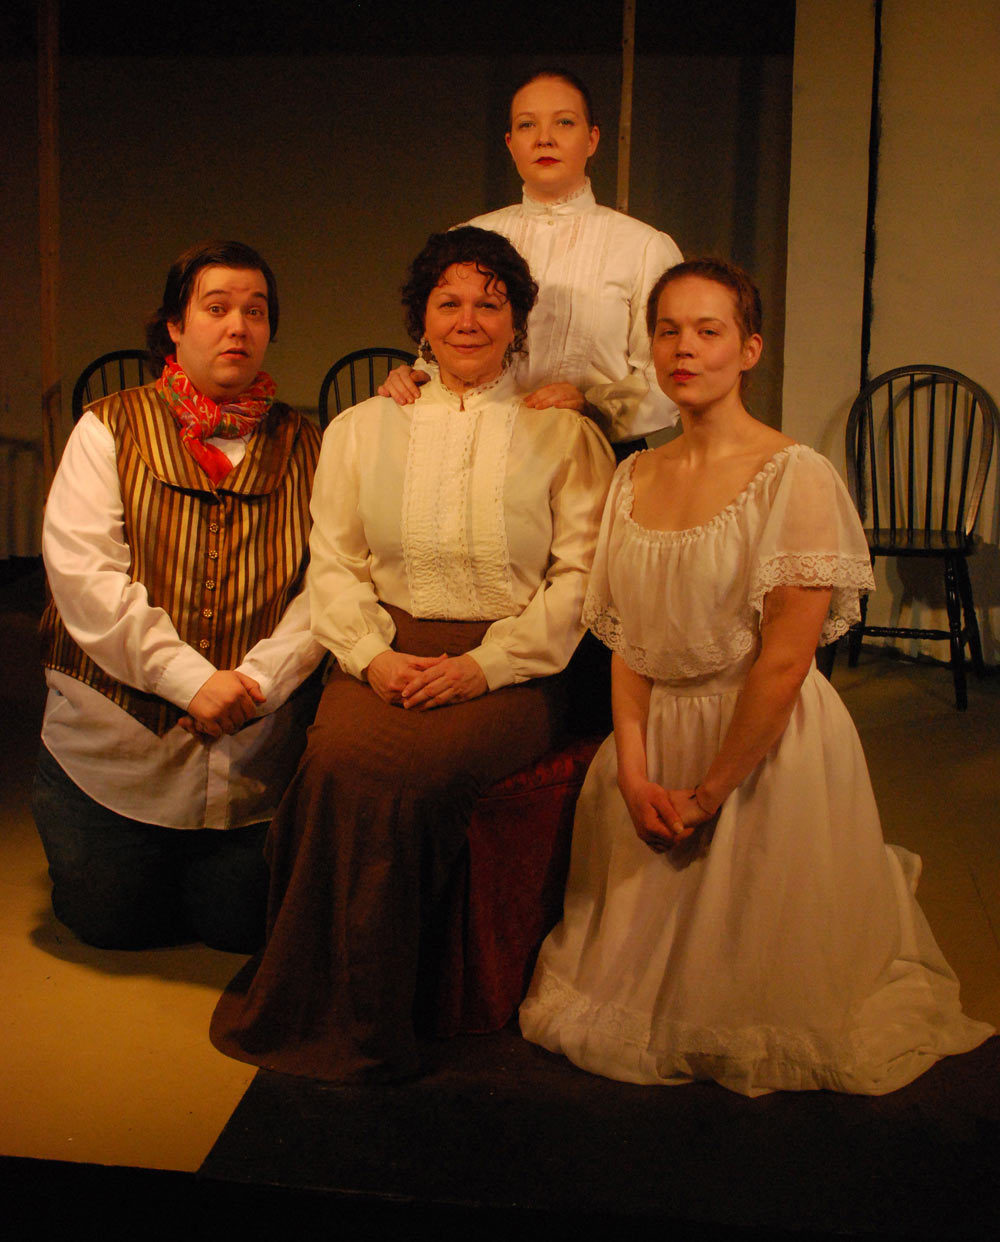 Justin Eberhard as Phillip, Joan Krause as Mrs Clandon, Aran Morris as Gloria, and Christina Yoho as Dolly in George Bernard Shaw's You Never Can Tell. 1